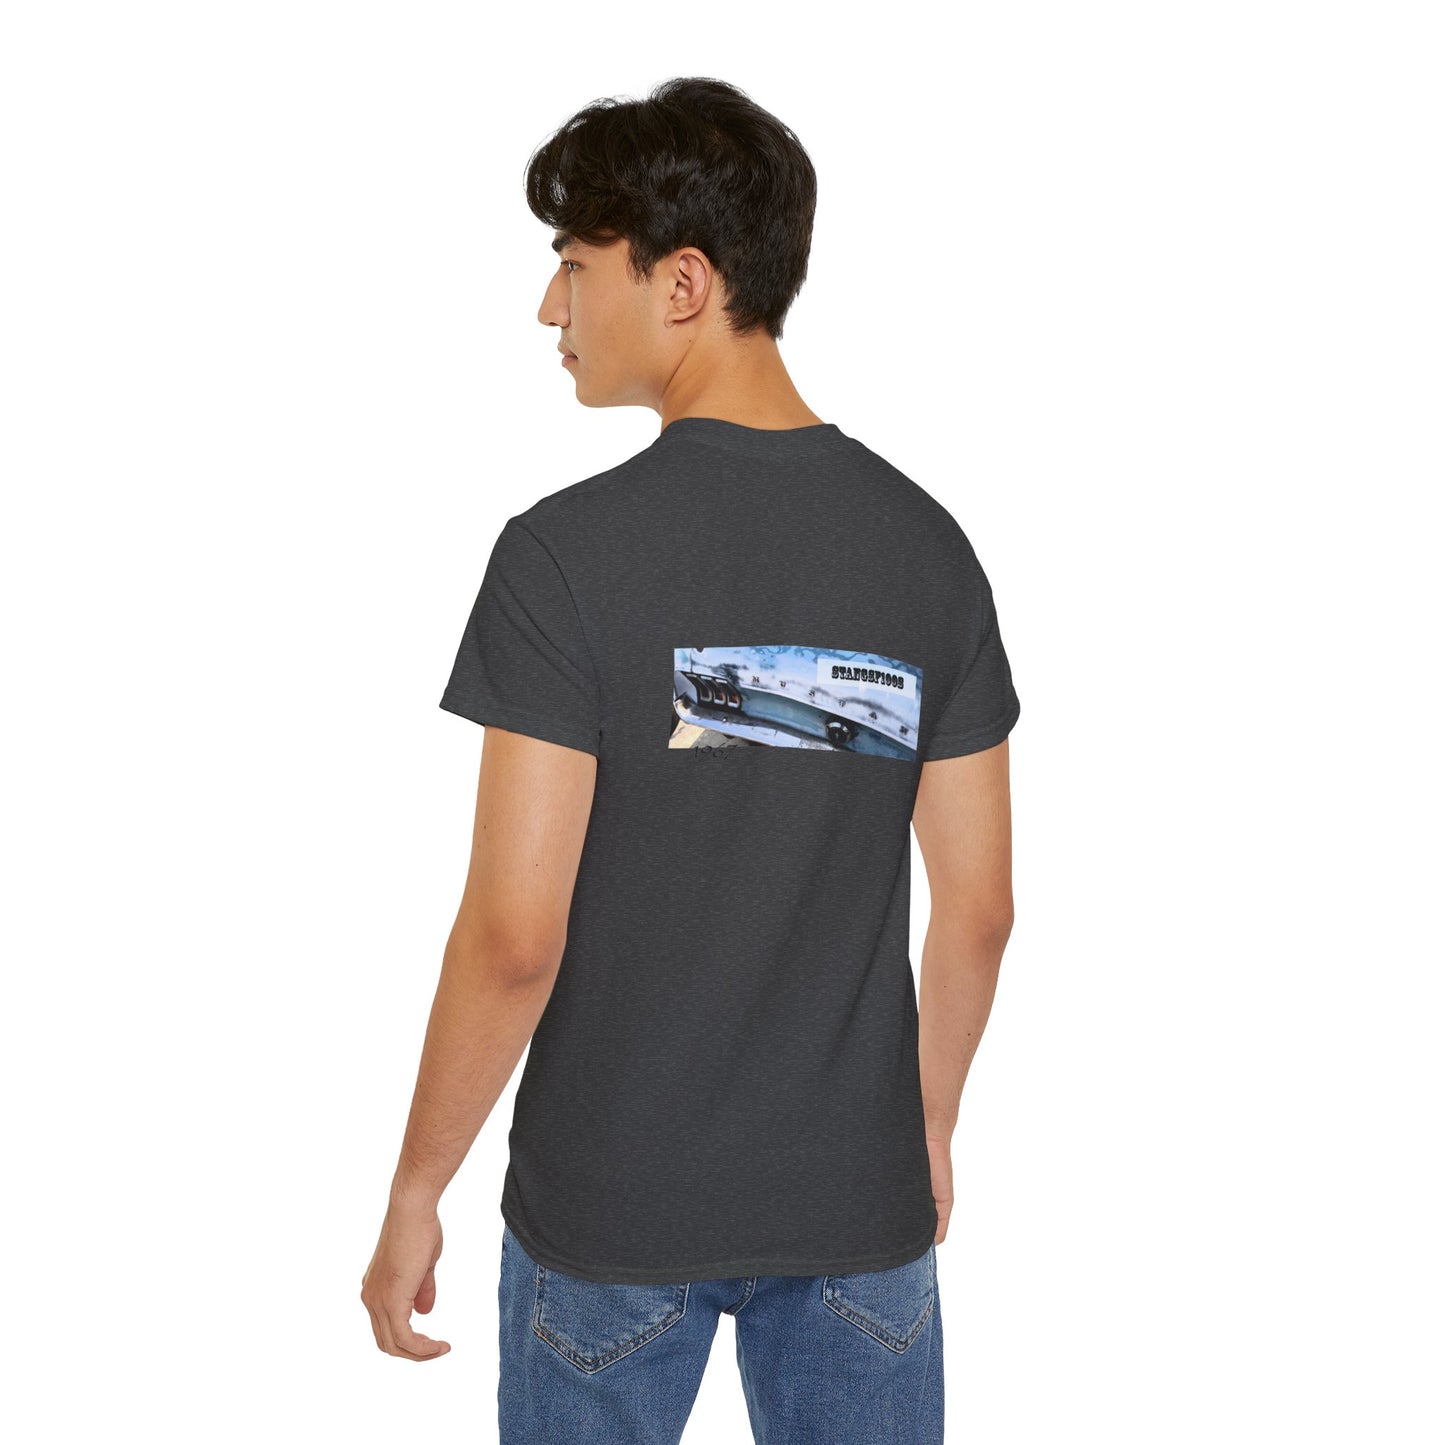 1967 Stang Classic on Back Unisex Ultra Cotton Tee.